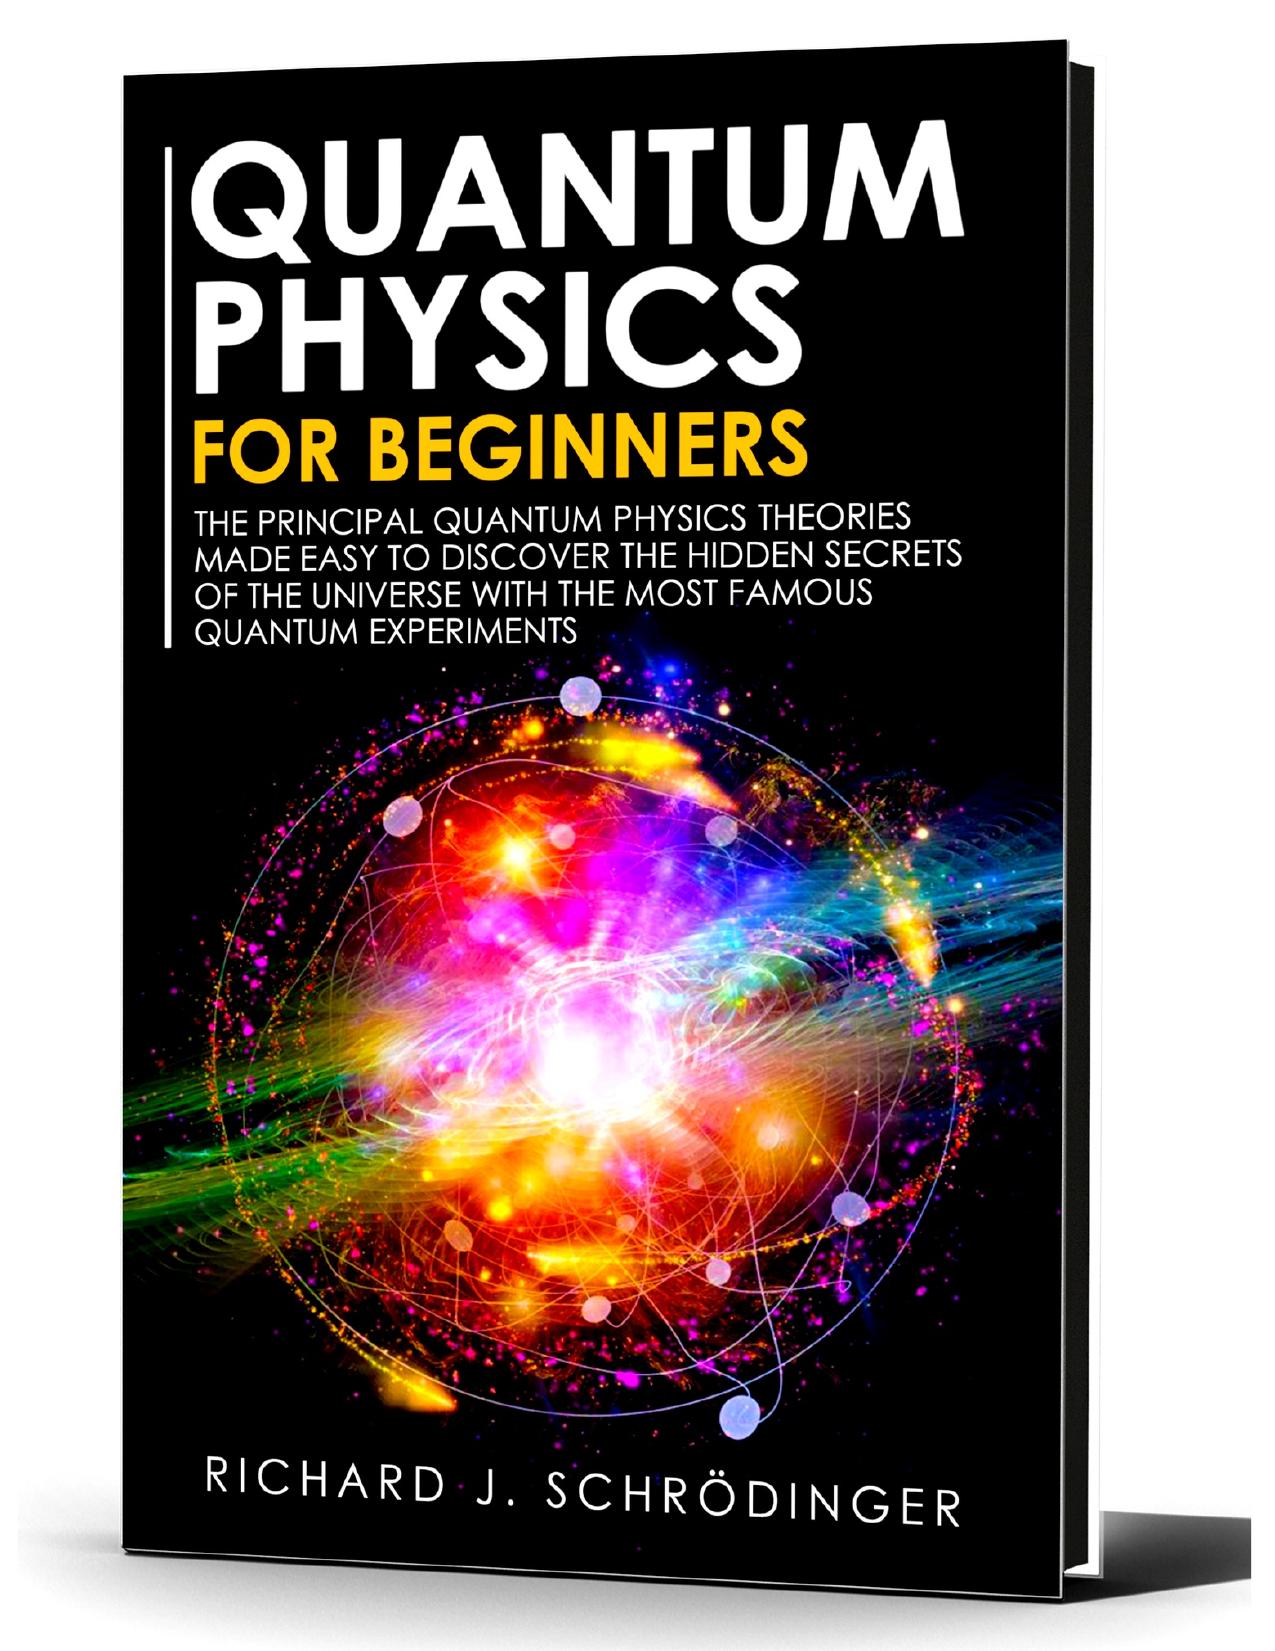 QUANTUM PHYSICS FOR BEGINNERS: The Principal Quantum Physics Theories made Easy to Discover the Hidden Secrets of the Universe with the Most Famous Quantum Experiments by Schrödinger Richard J